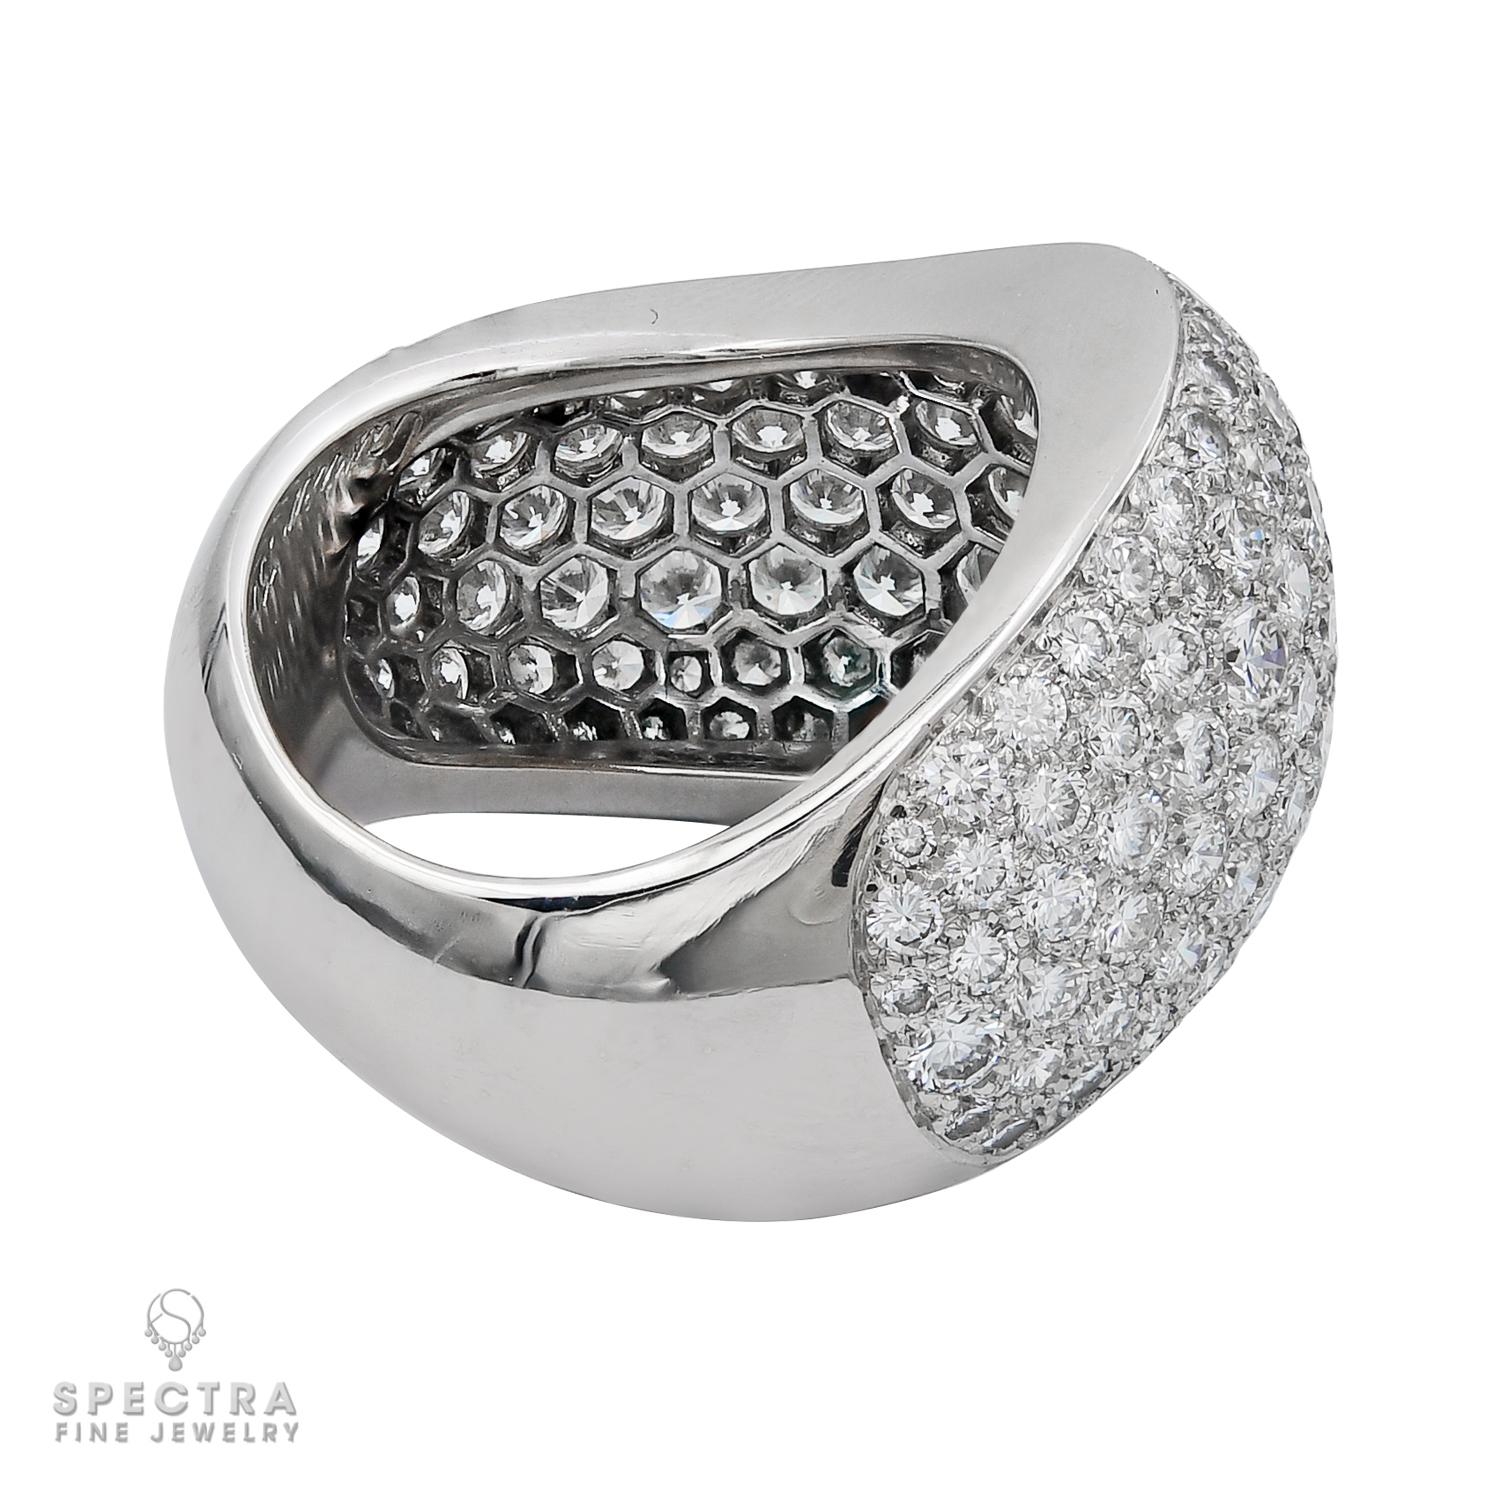 This Cartier Vintage Diamond Bombe Ring epitomizes the iconic craftsmanship of the esteemed French Maison Cartier. Its 